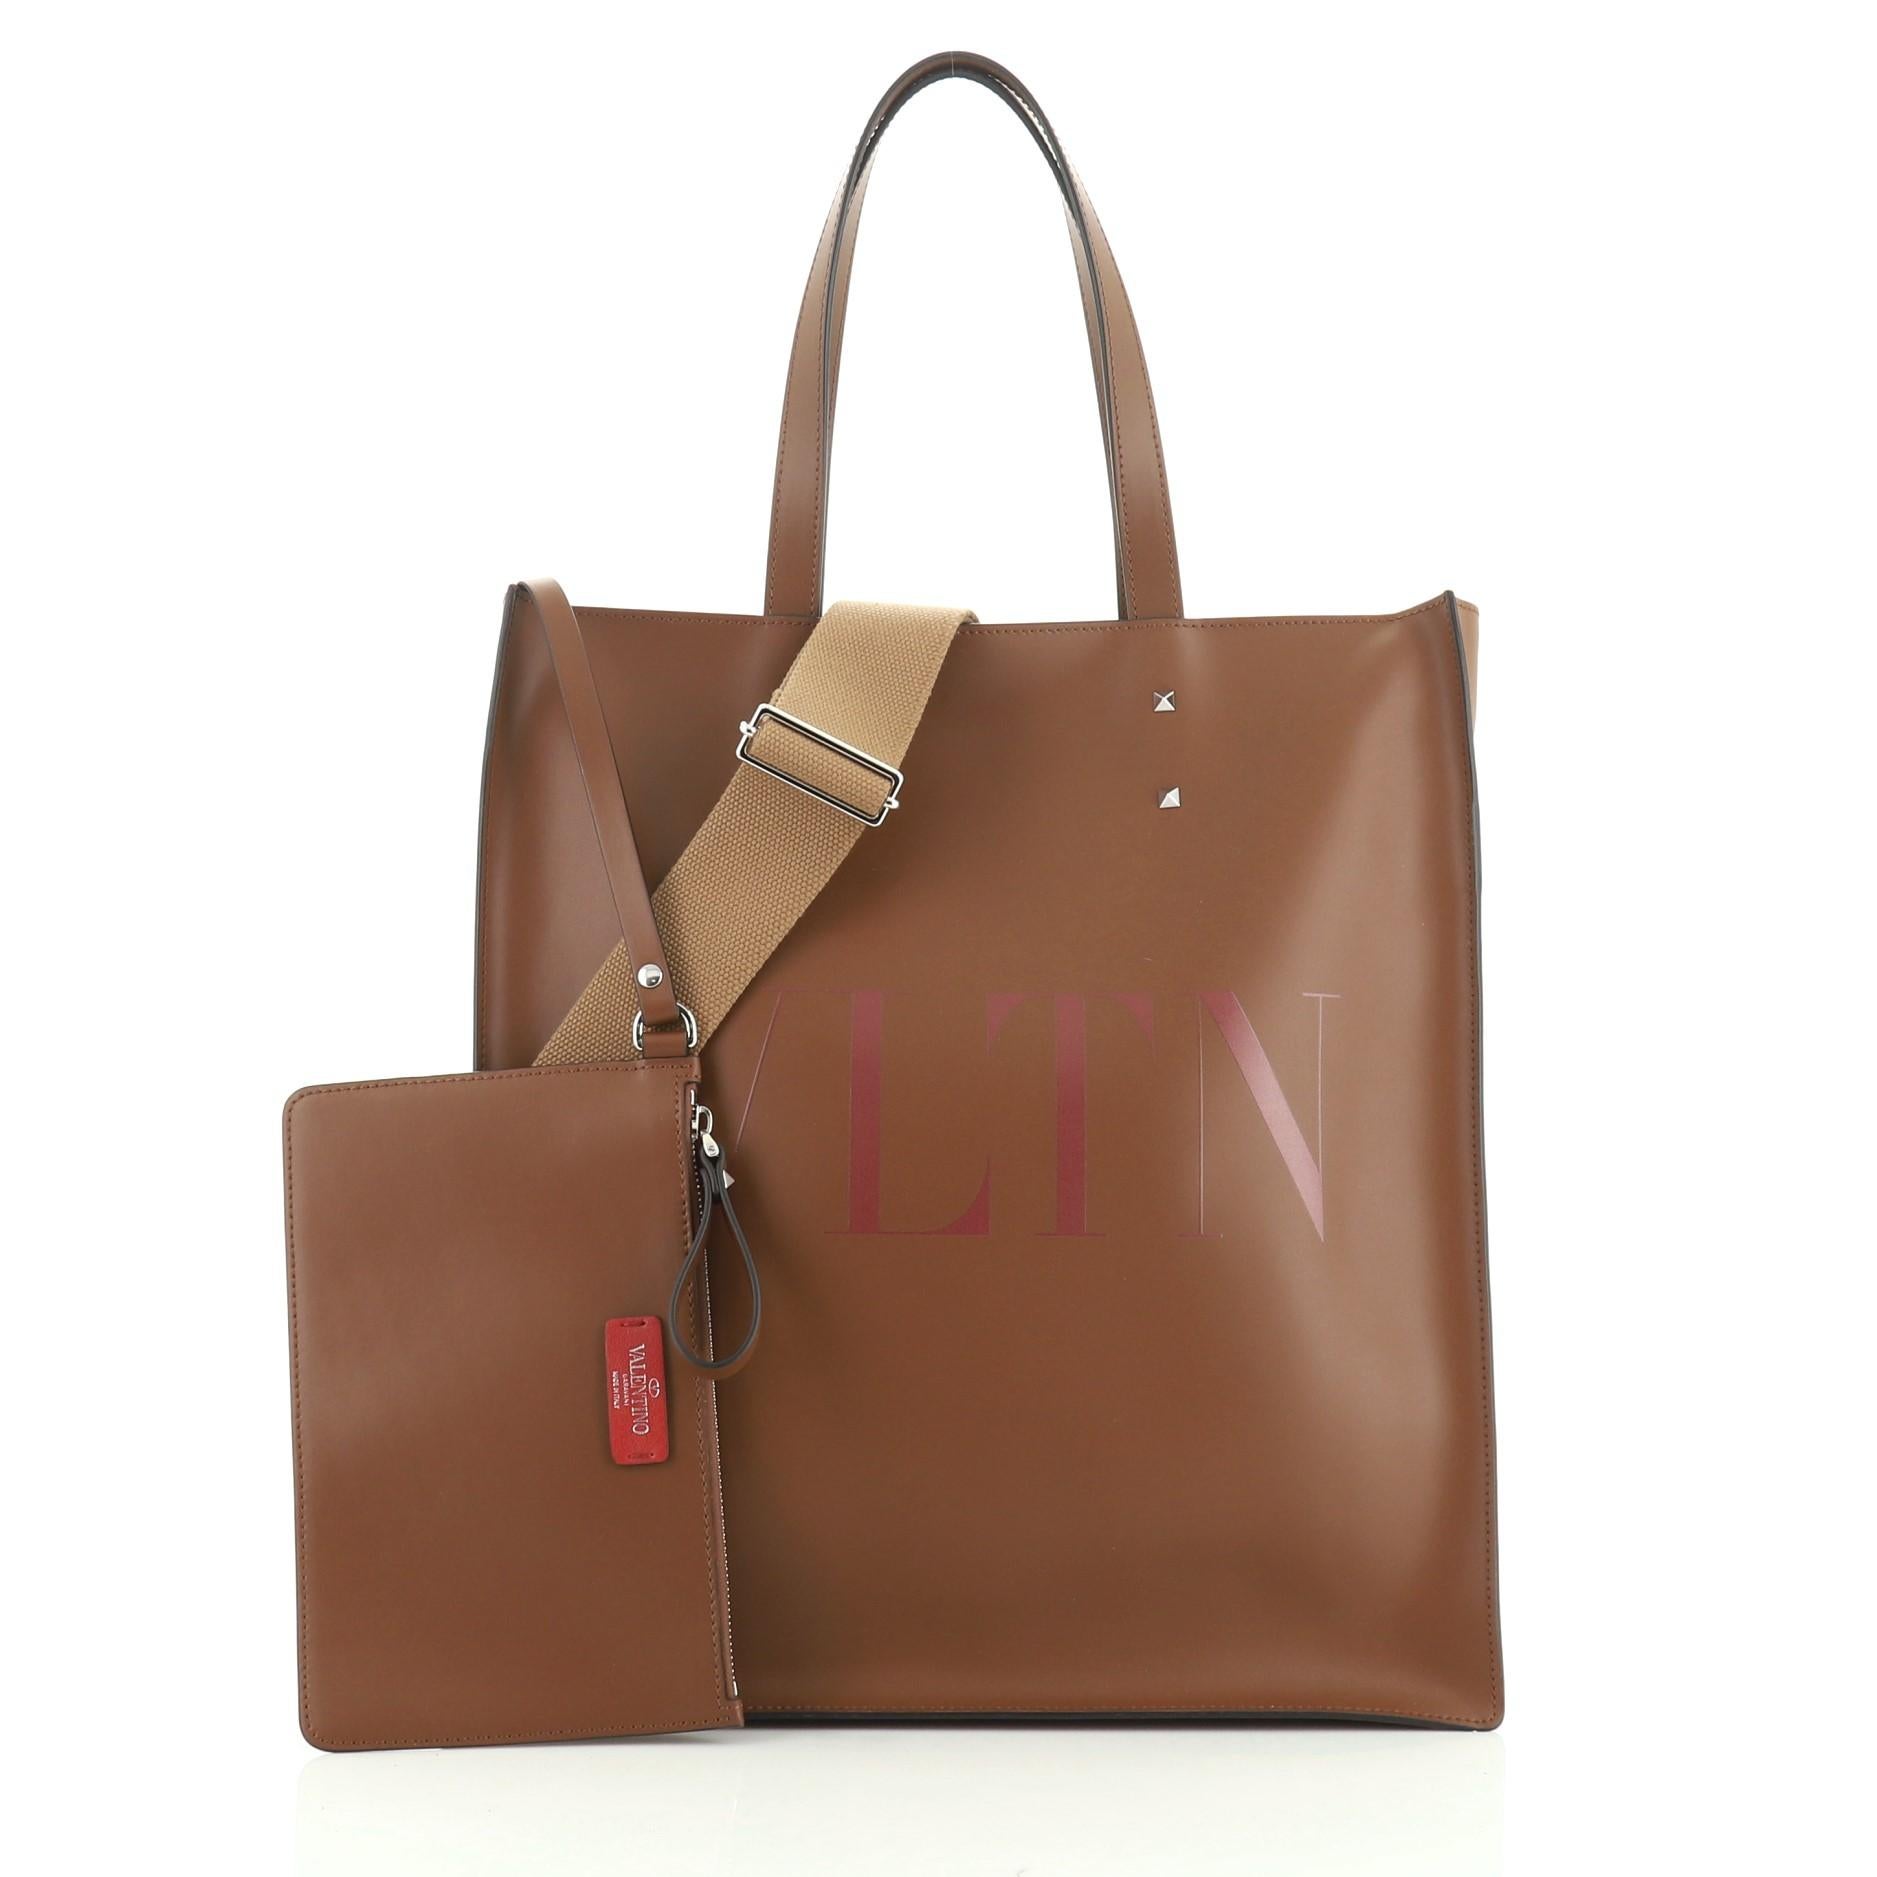 This Valentino VLTN Convertible Rockstud Tote Printed Leather Tall, crafted from brown leather, features dual flat handles and silver-tone hardware. It opens to a brown microfiber interior. 

Condition: Excellent. Slight creasing on exterior, small